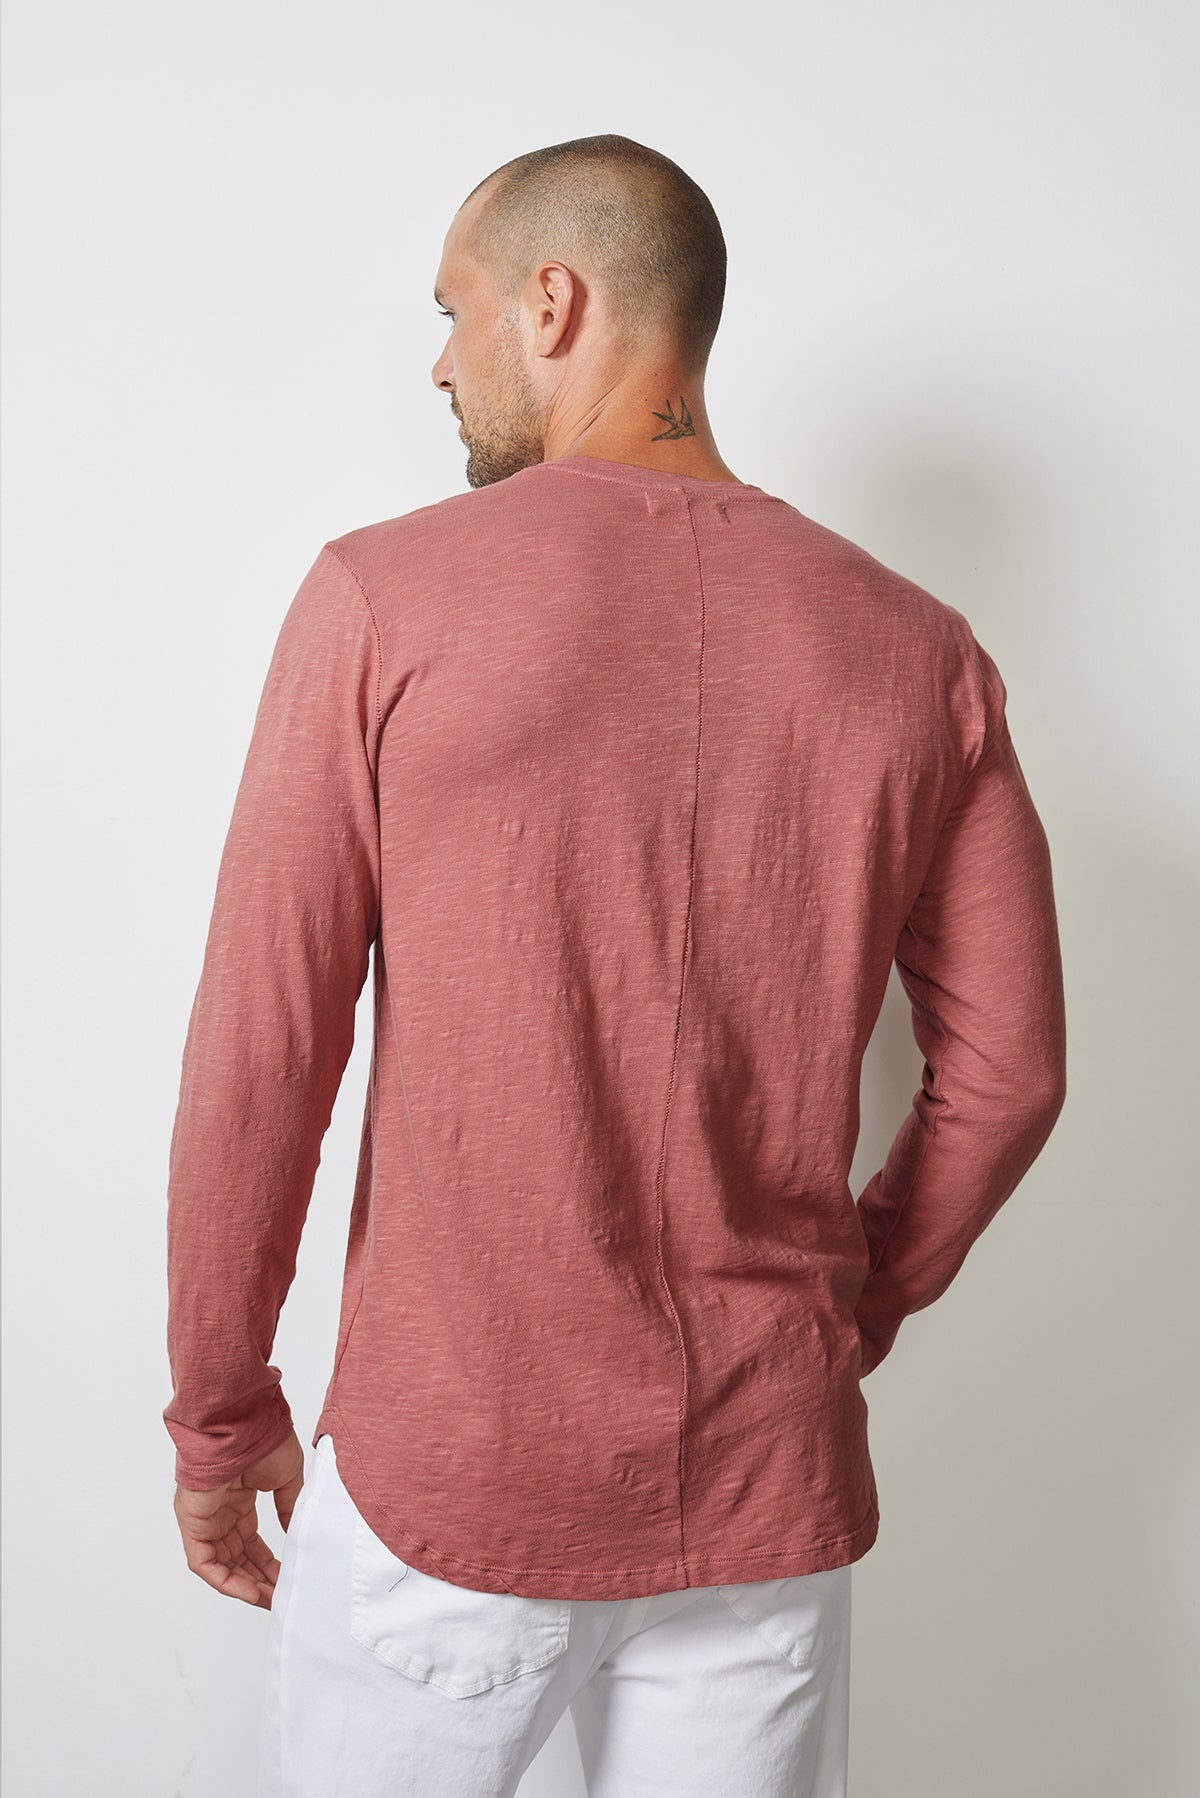 the back view of a man wearing a Velvet by Graham & Spencer CHANCE CREW NECK TEE.-14905793740993